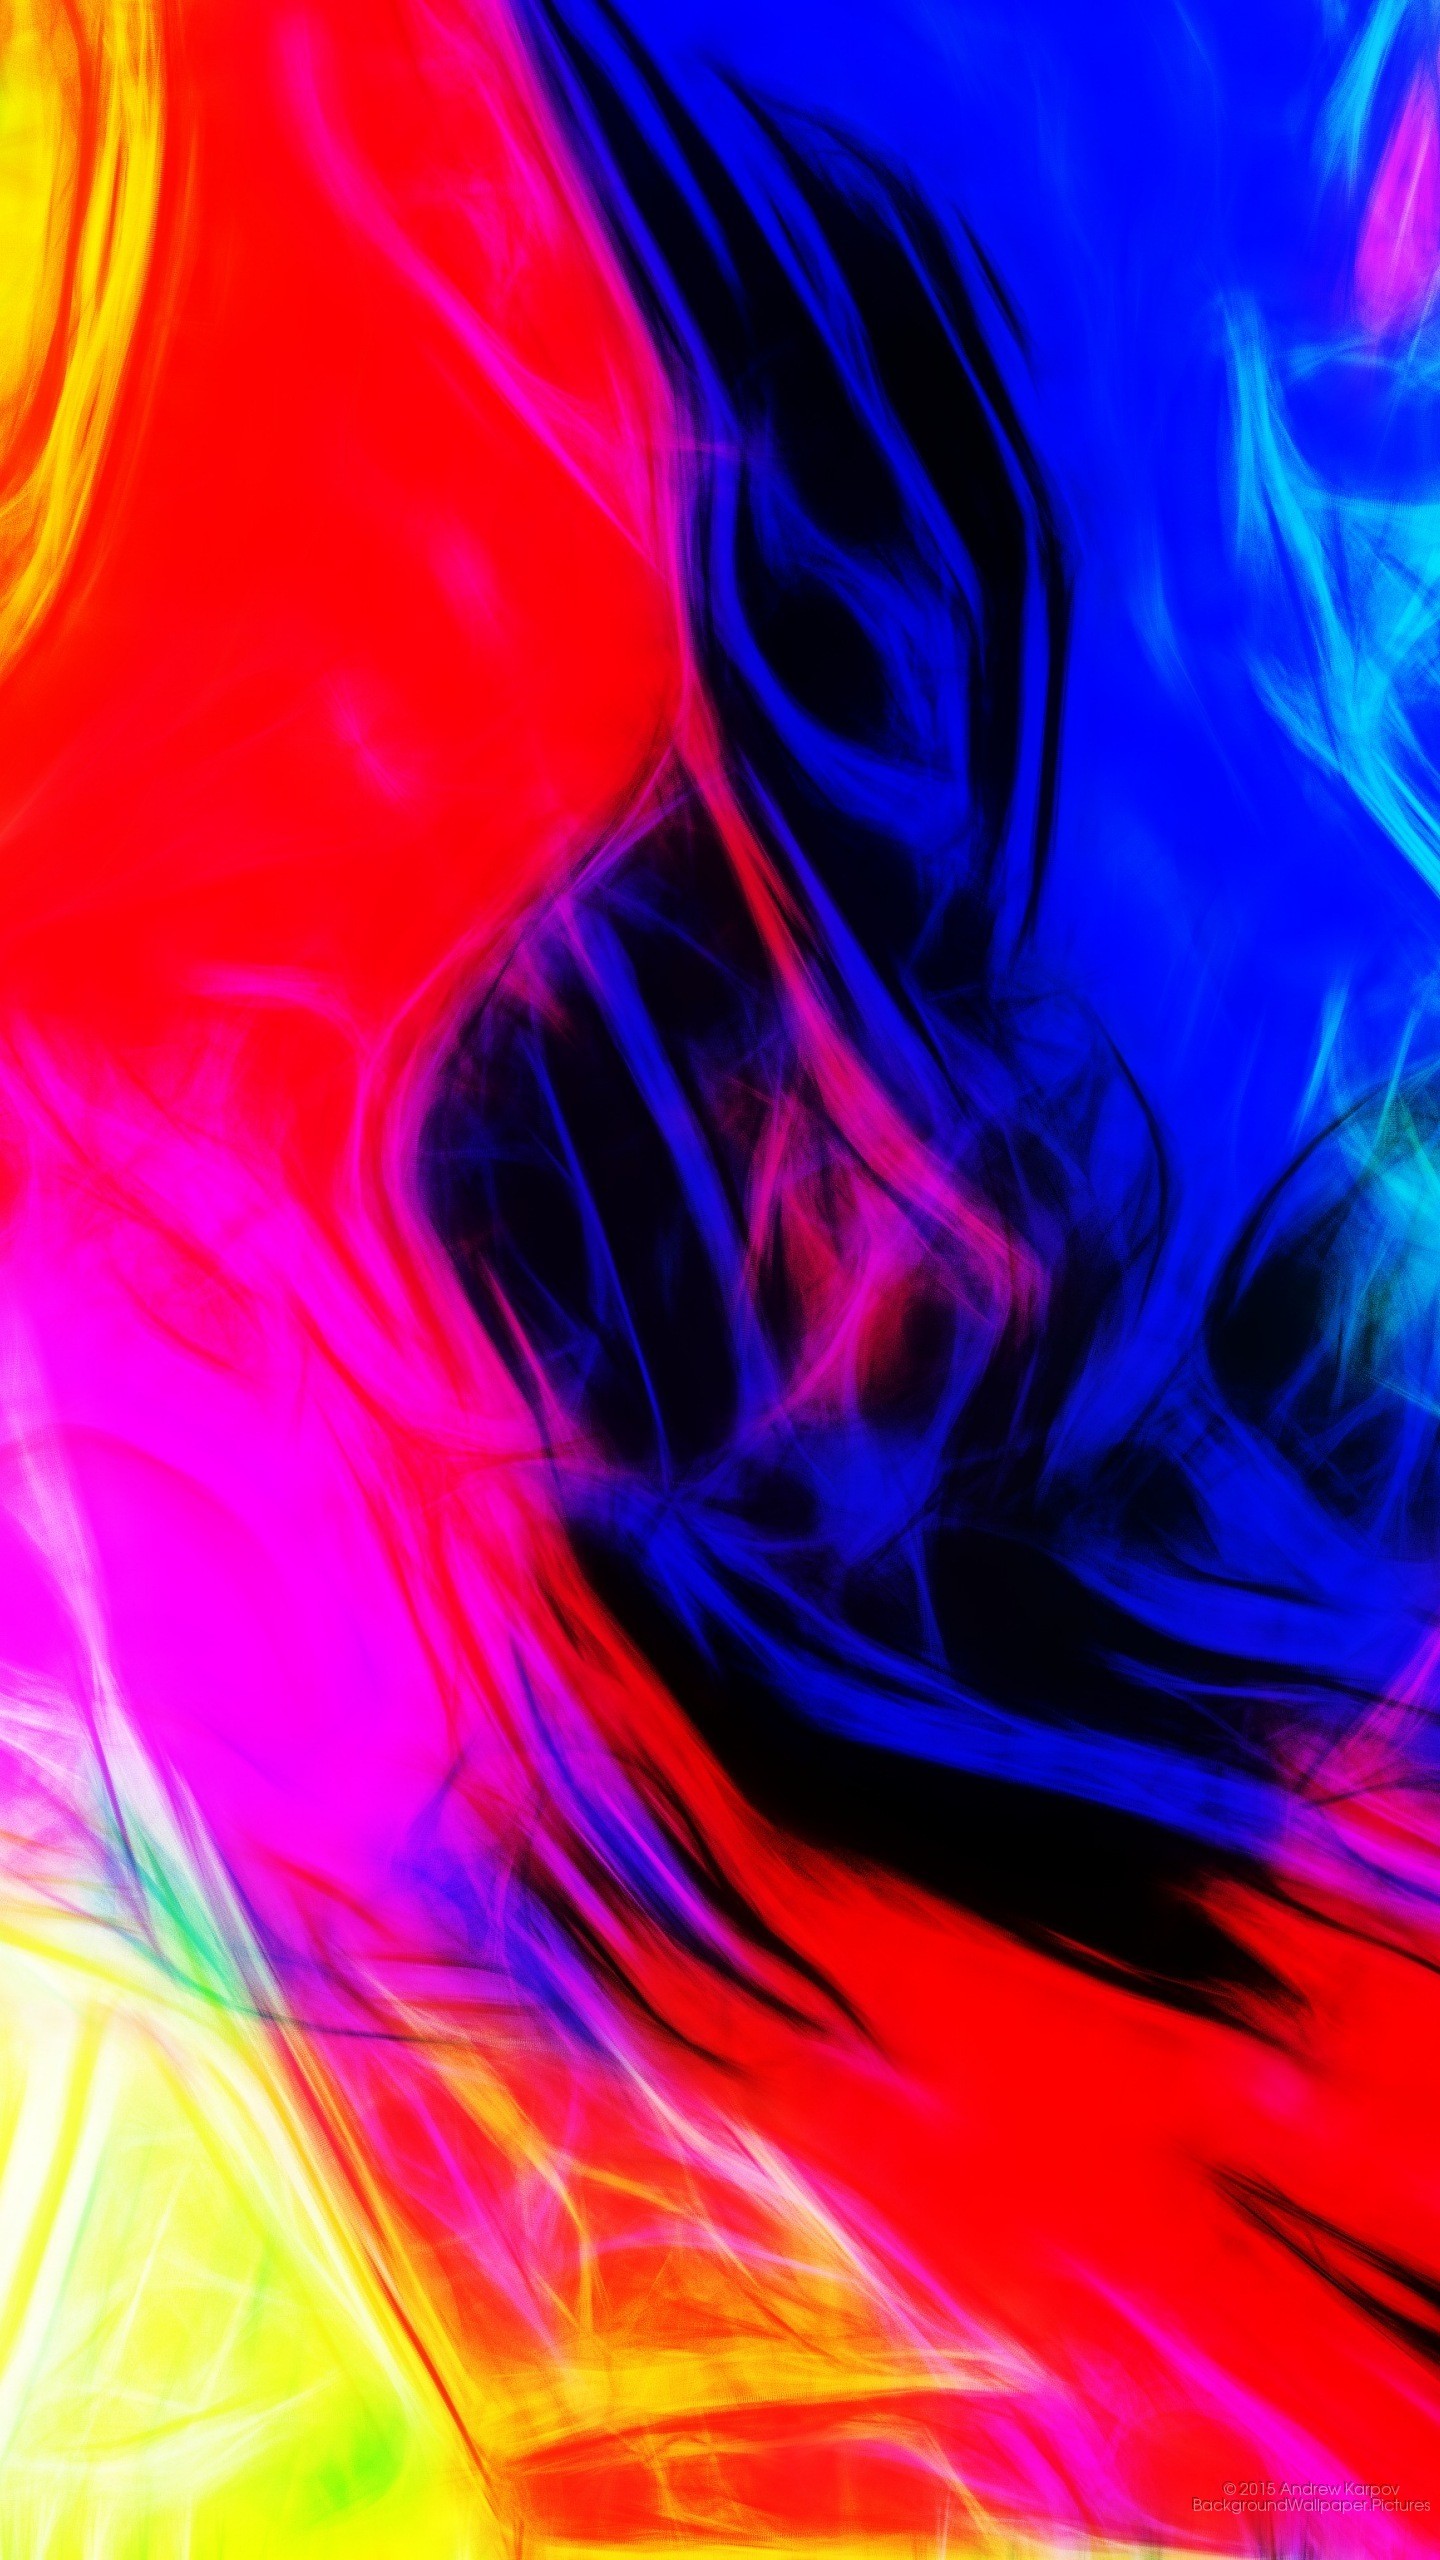 1440x2560 Kvantum Phantazy: Cool backgrounds pictures - Free abstract wallpaper.  Energy of mind is the